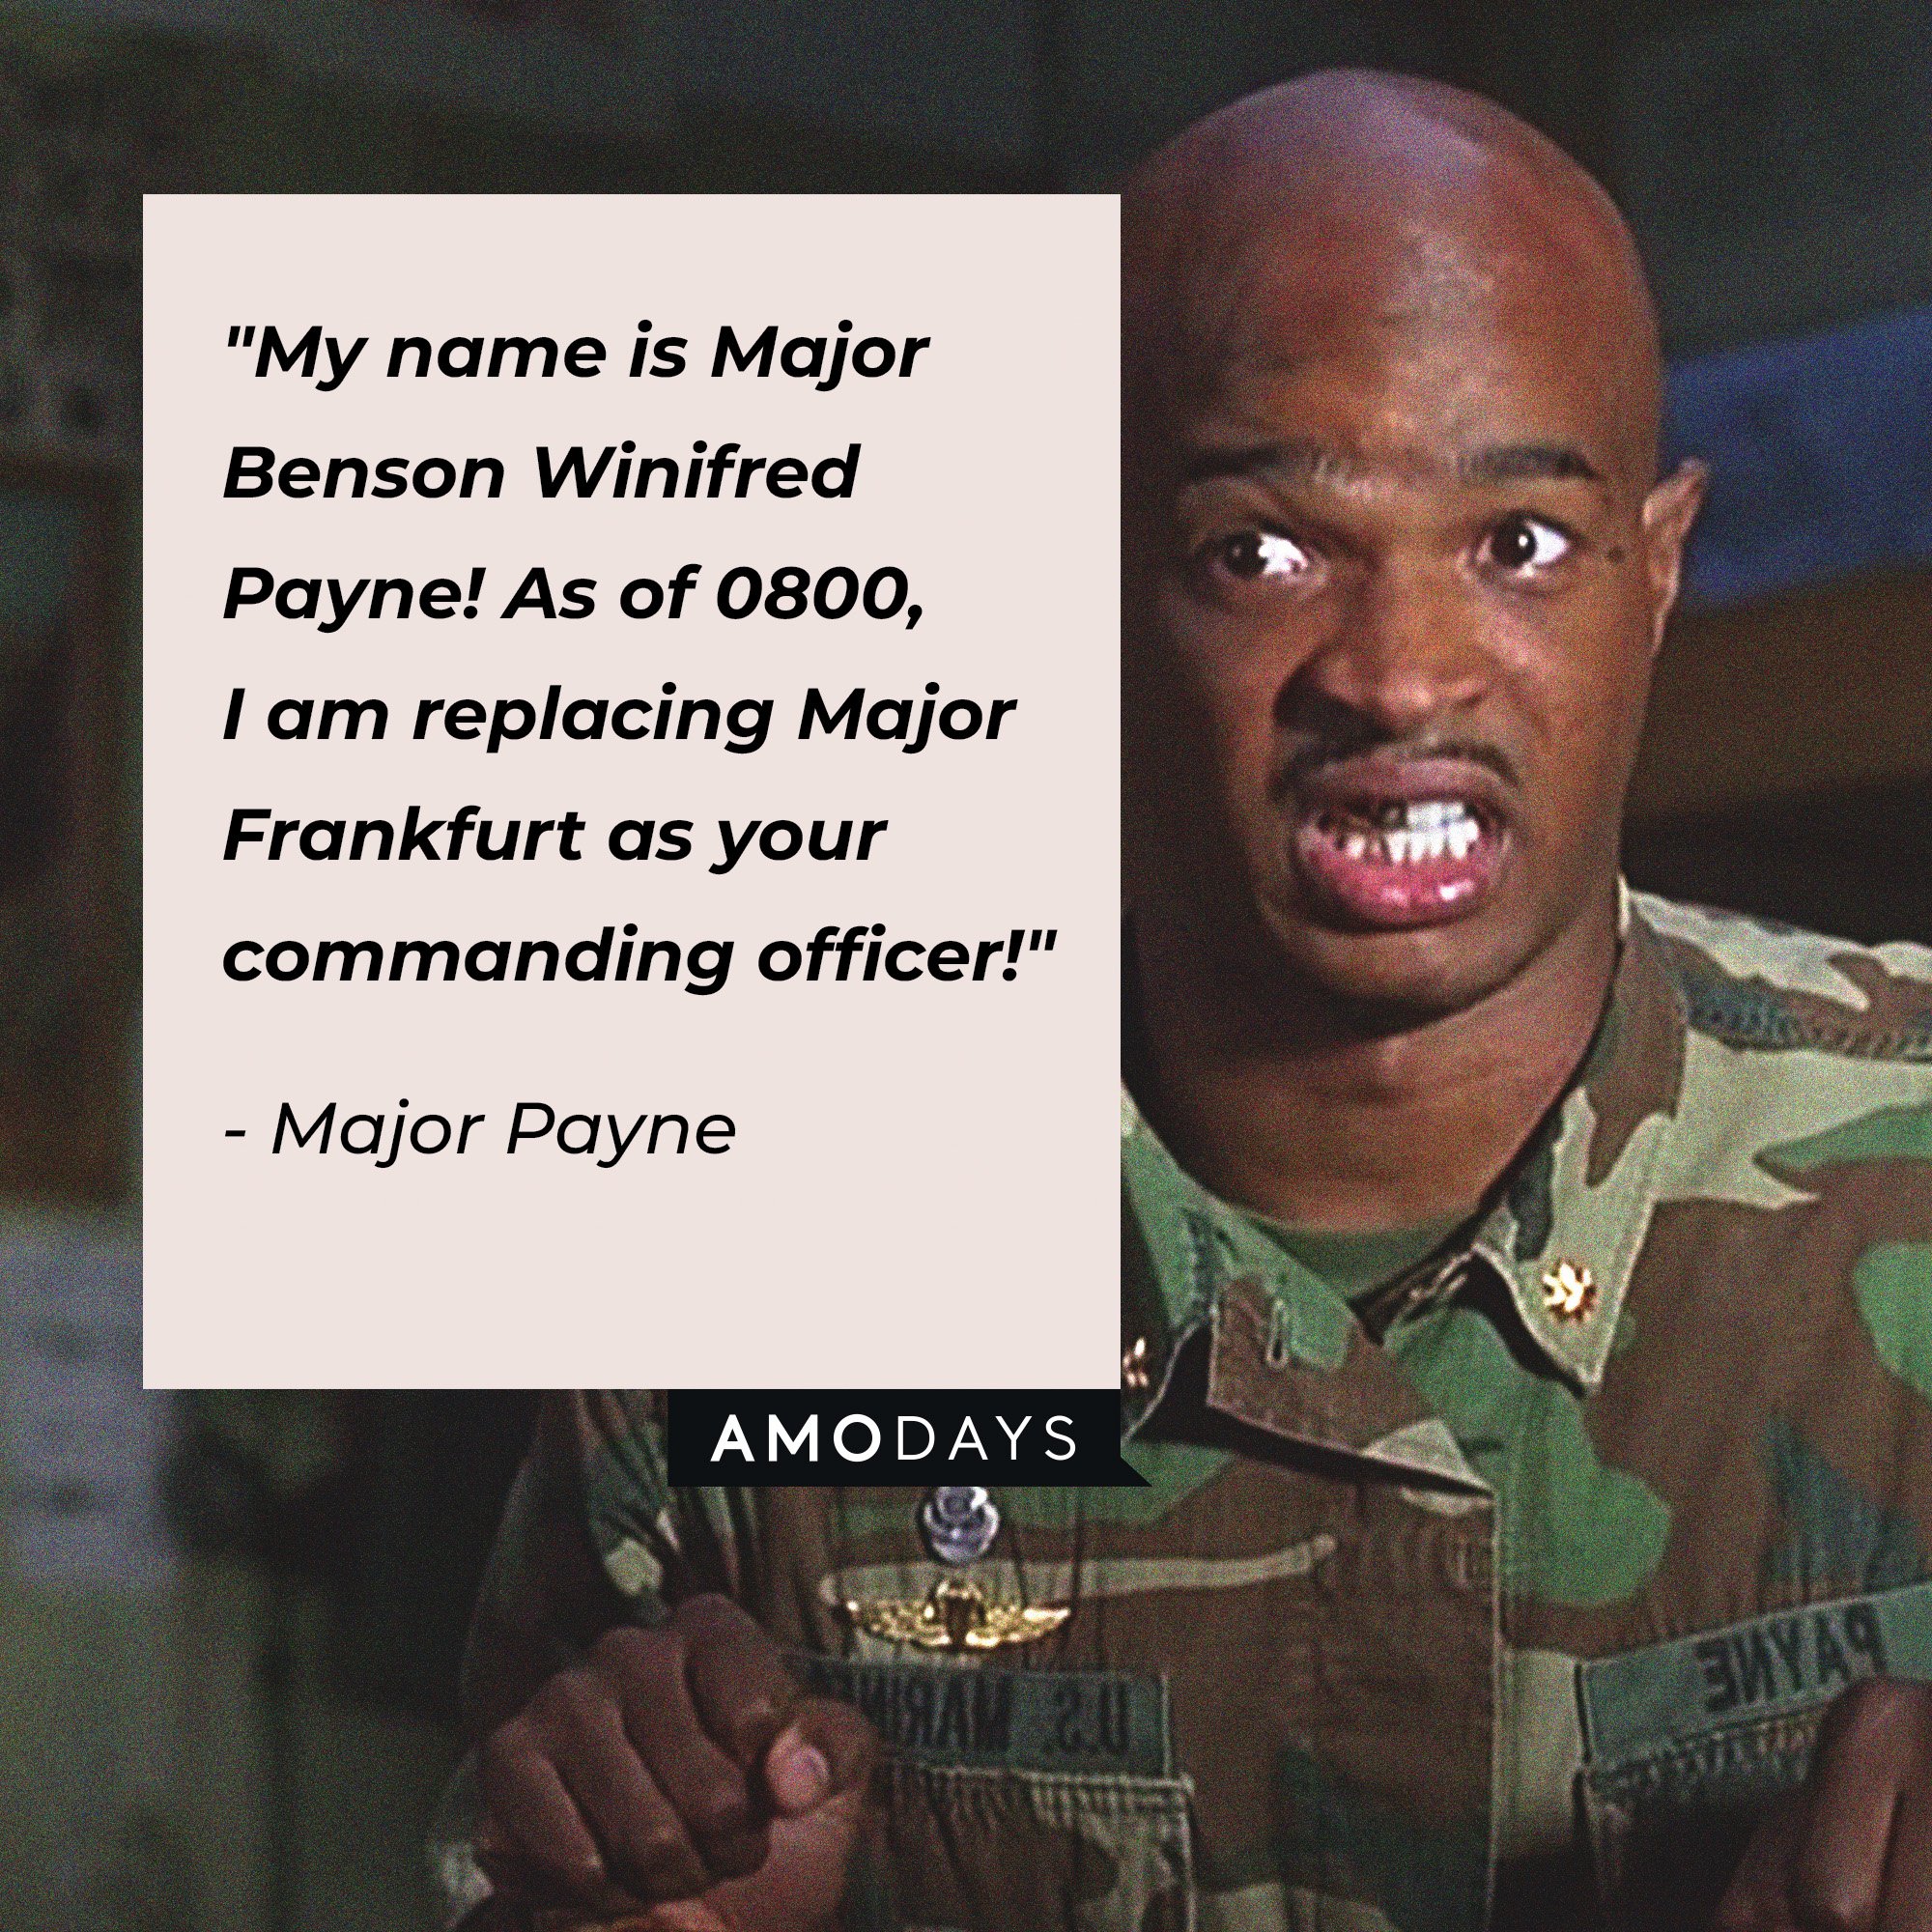 Major Payne's quote: "My name is Major Benson Winifred Payne! As of 0800, I am replacing Major Frankfurt as your commanding officer!"  | Source: Amodays